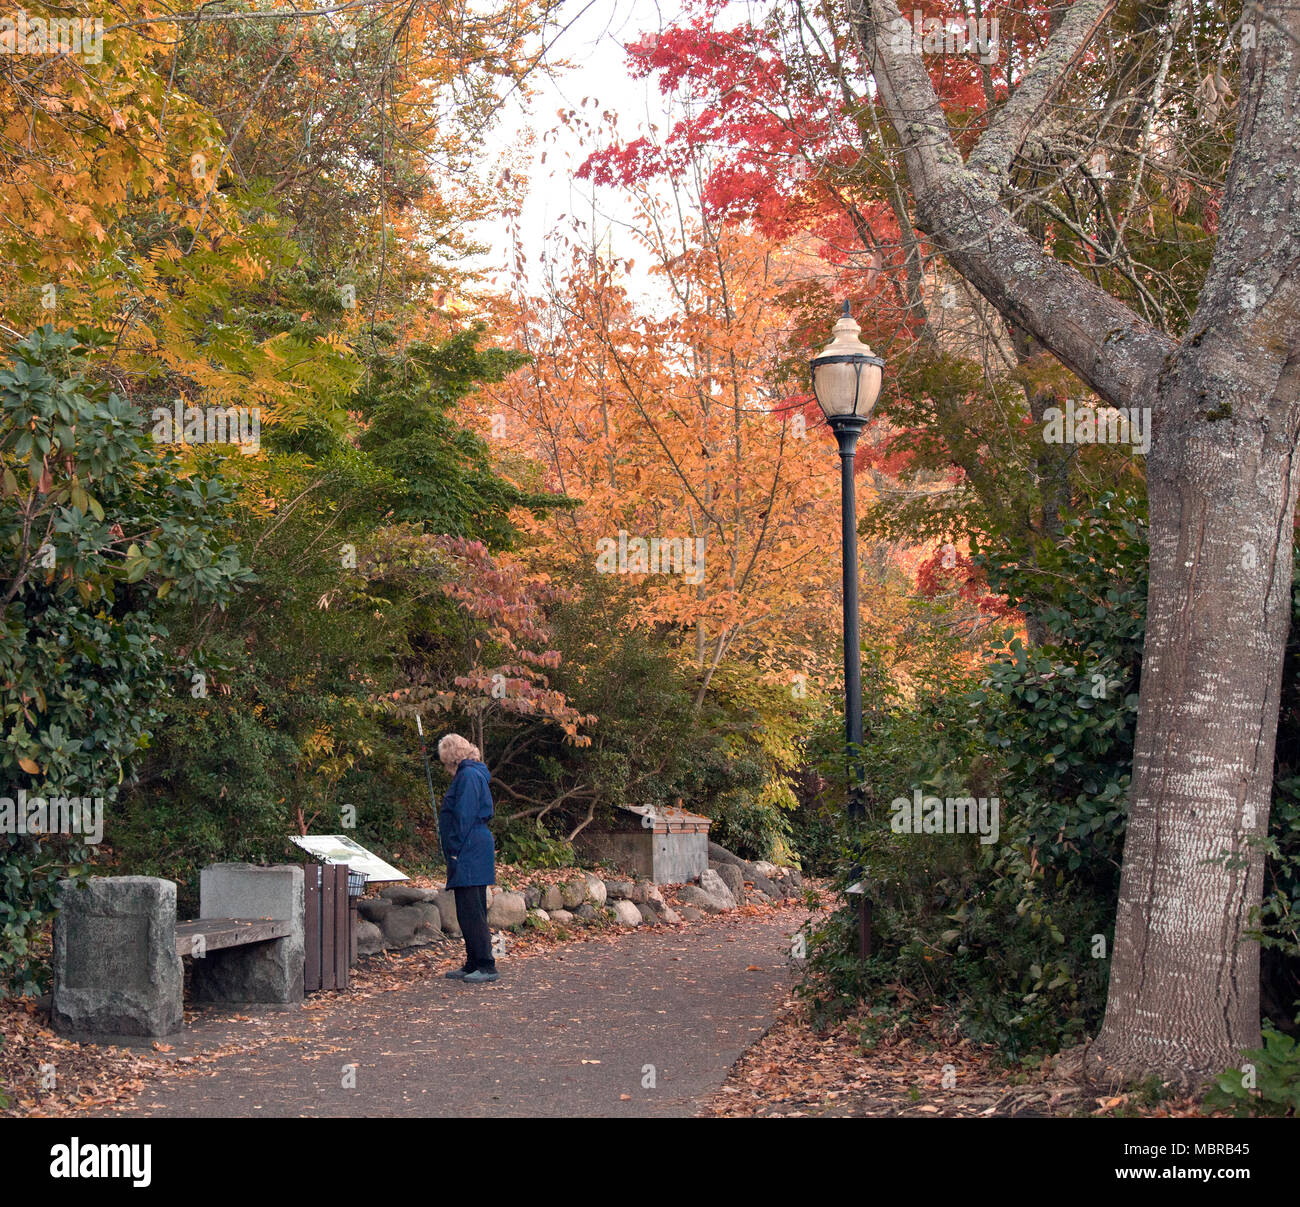 Early morning walker in blue coat stops to read an information board amid intense fall color, Lithia Park, Ashland, Oregon. Stock Photo